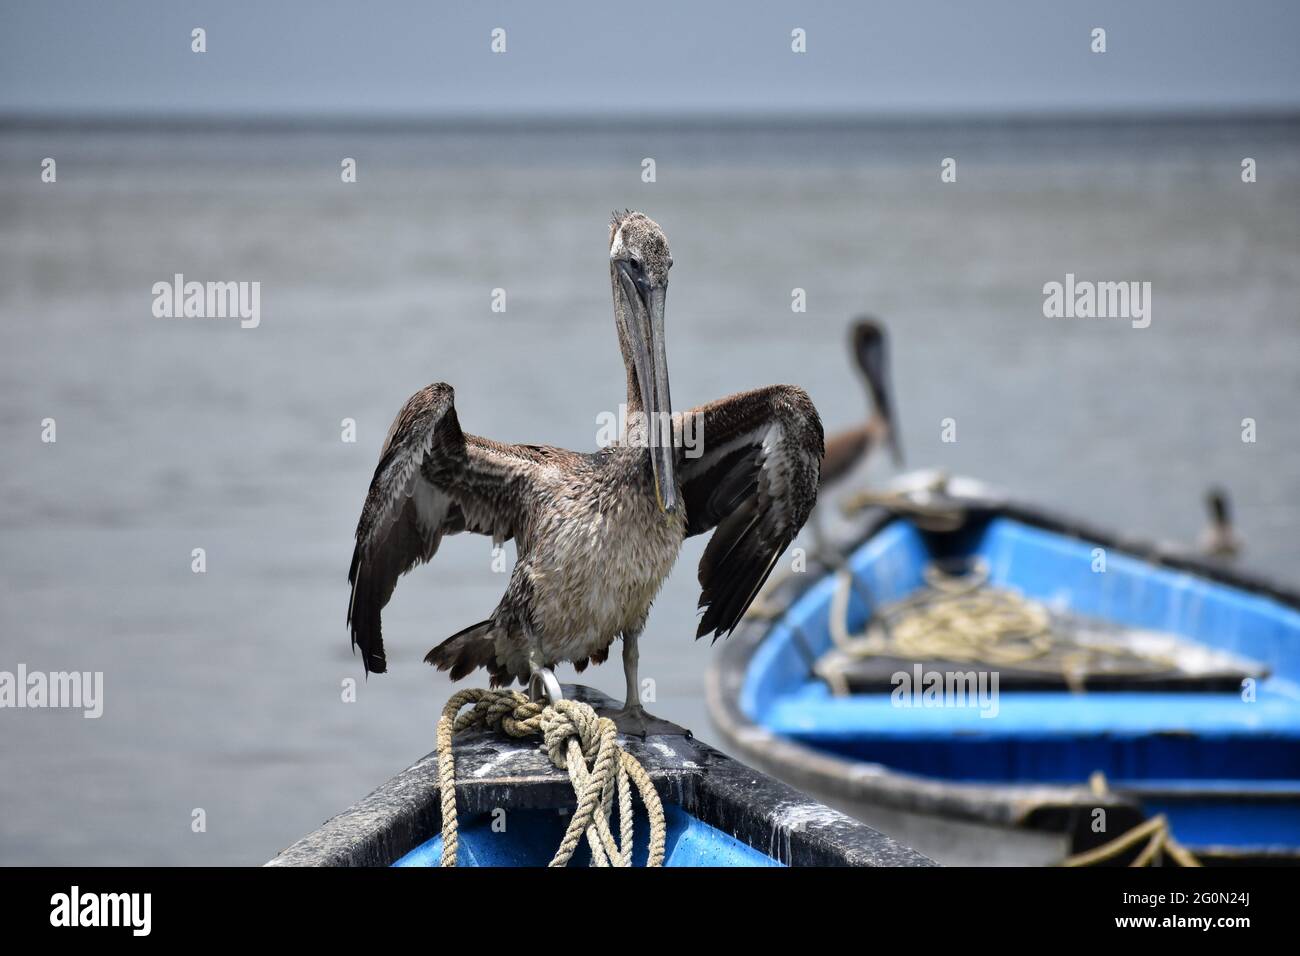 A portrait of a brown pelican on a fishing boat in Orange Valley, Trinidad. Stock Photo